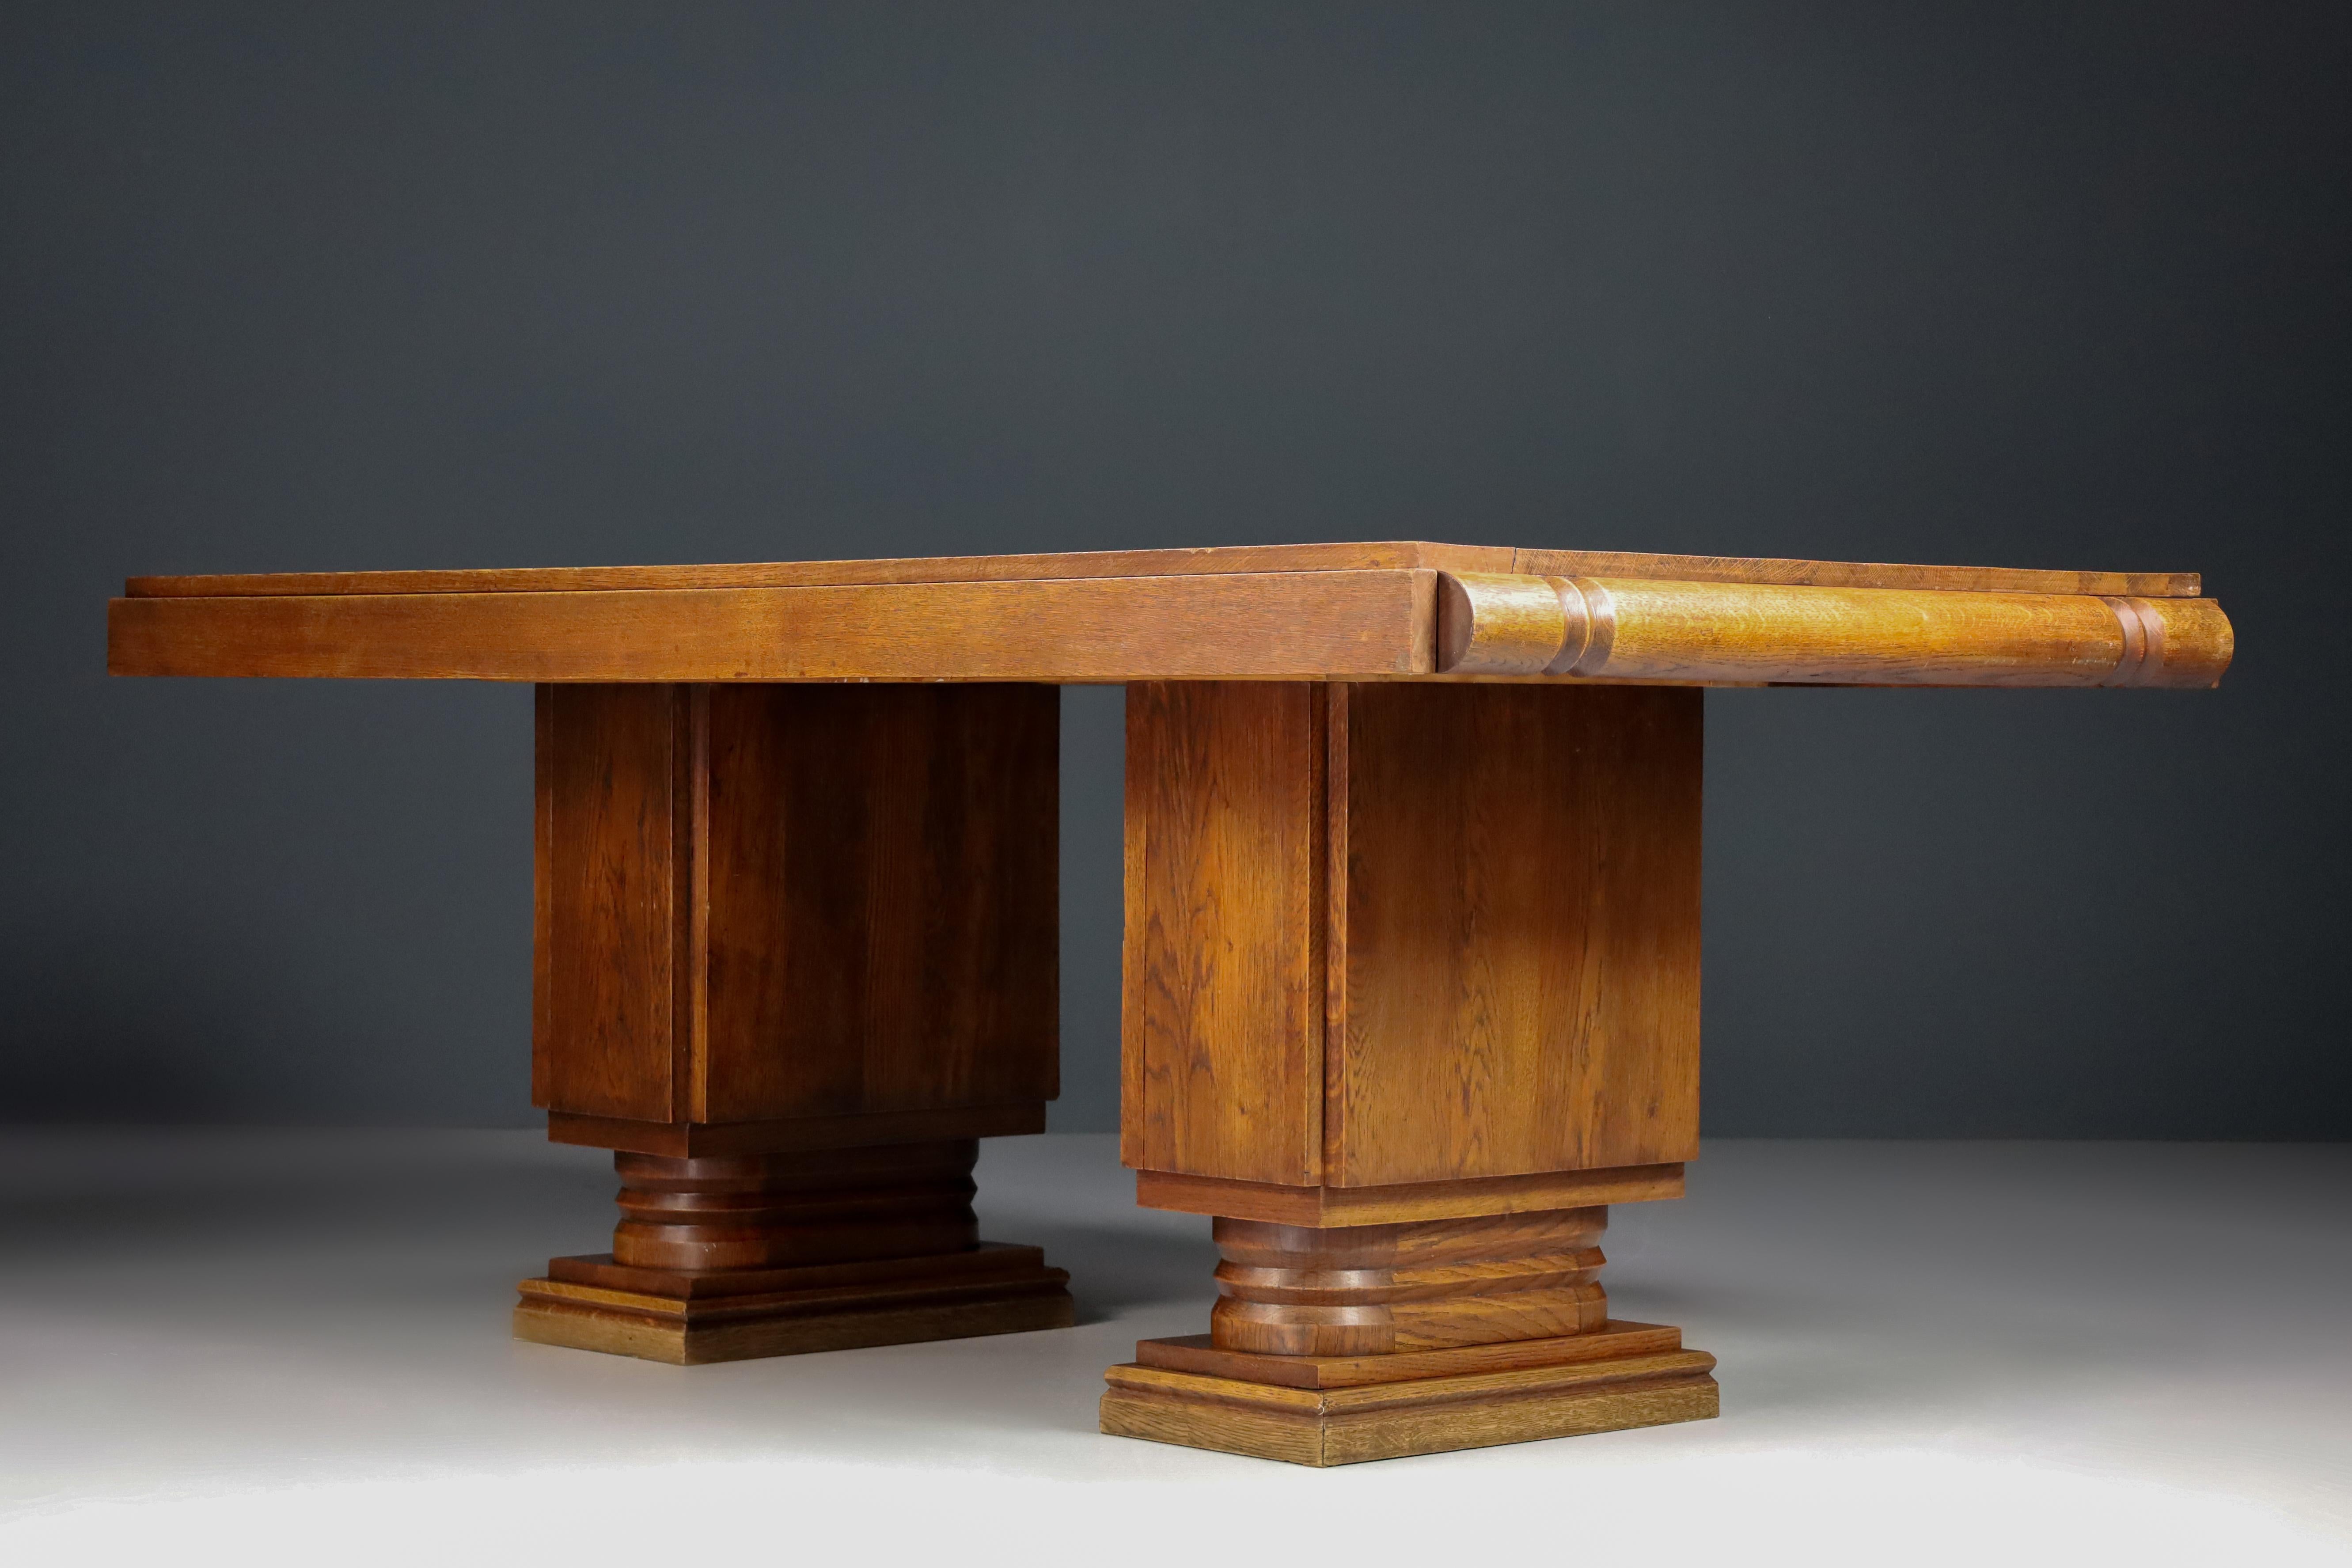 Art Deco extendable table in oak by Charles Dudouyt, France 1940s.

This stunning extendable table was crafted in Normandy, France, circa 1940. This extendable (extra 100cm) dining table made in oak is sure to add an element of French brutalism to